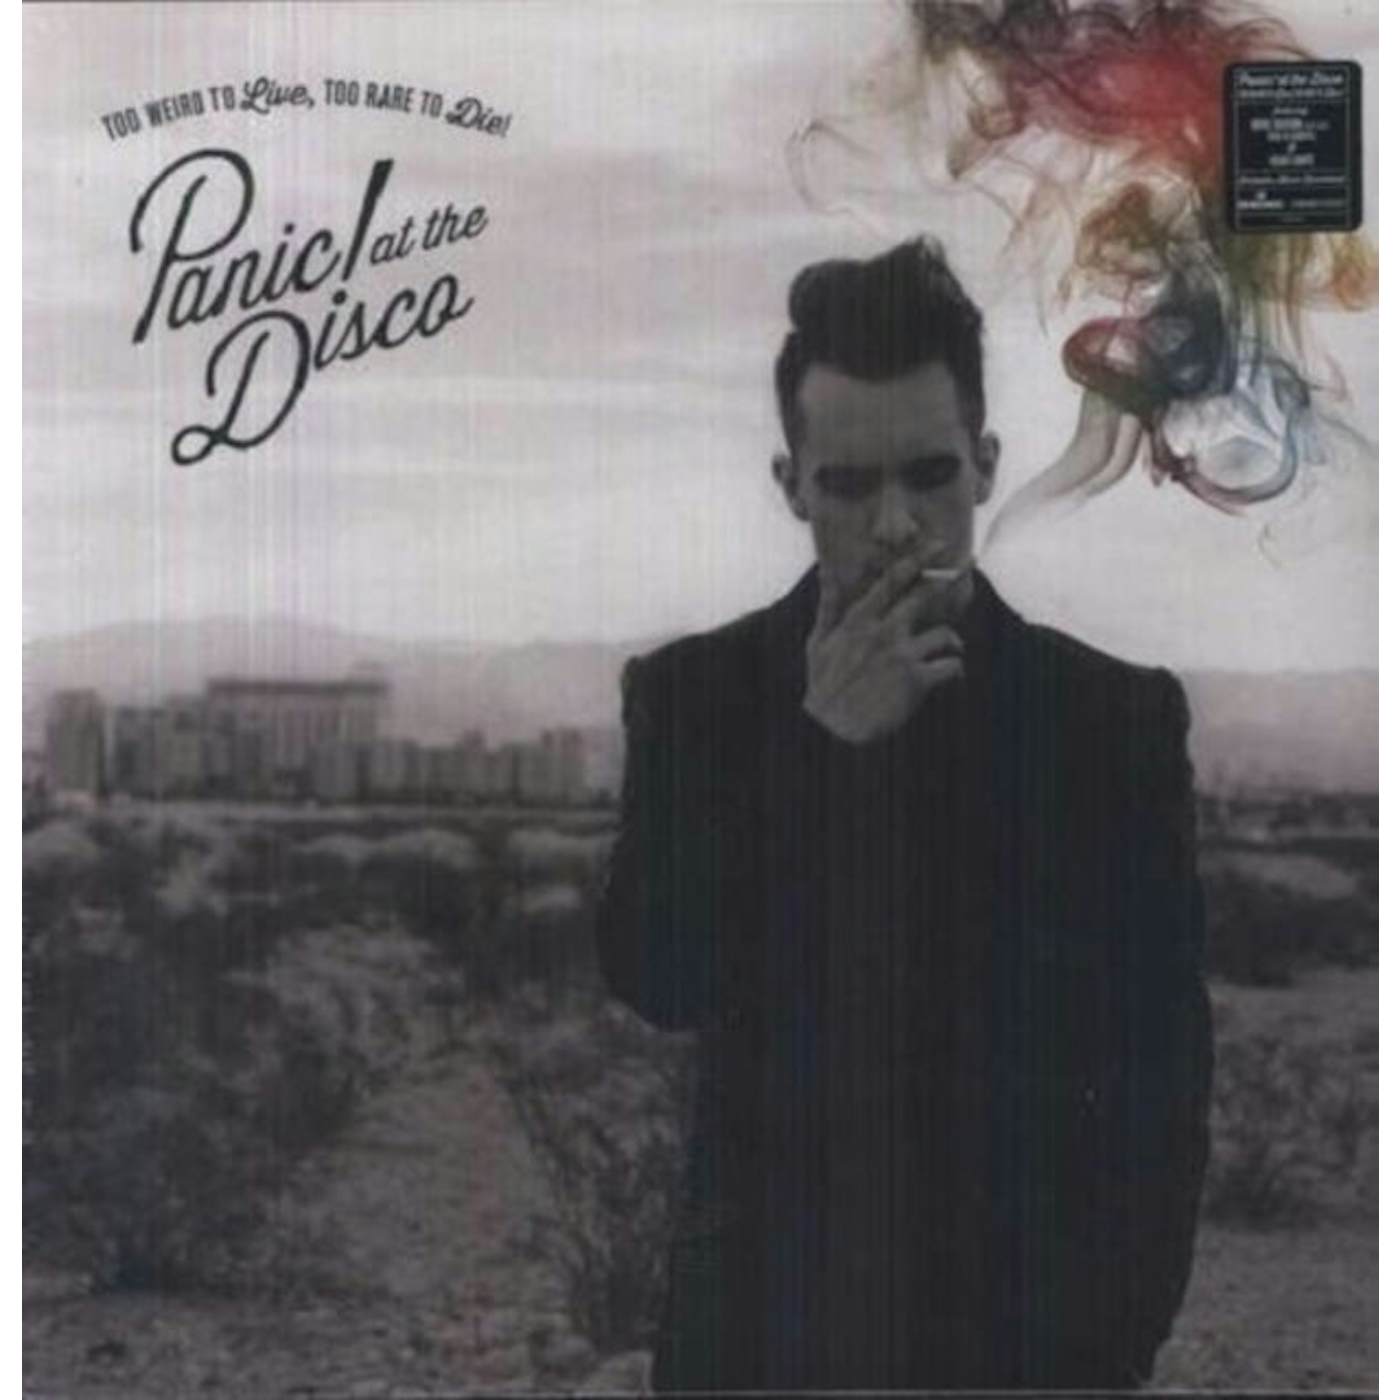 Panic! At The Disco LP Vinyl Record - Too Weird To Live Too Rare To Die